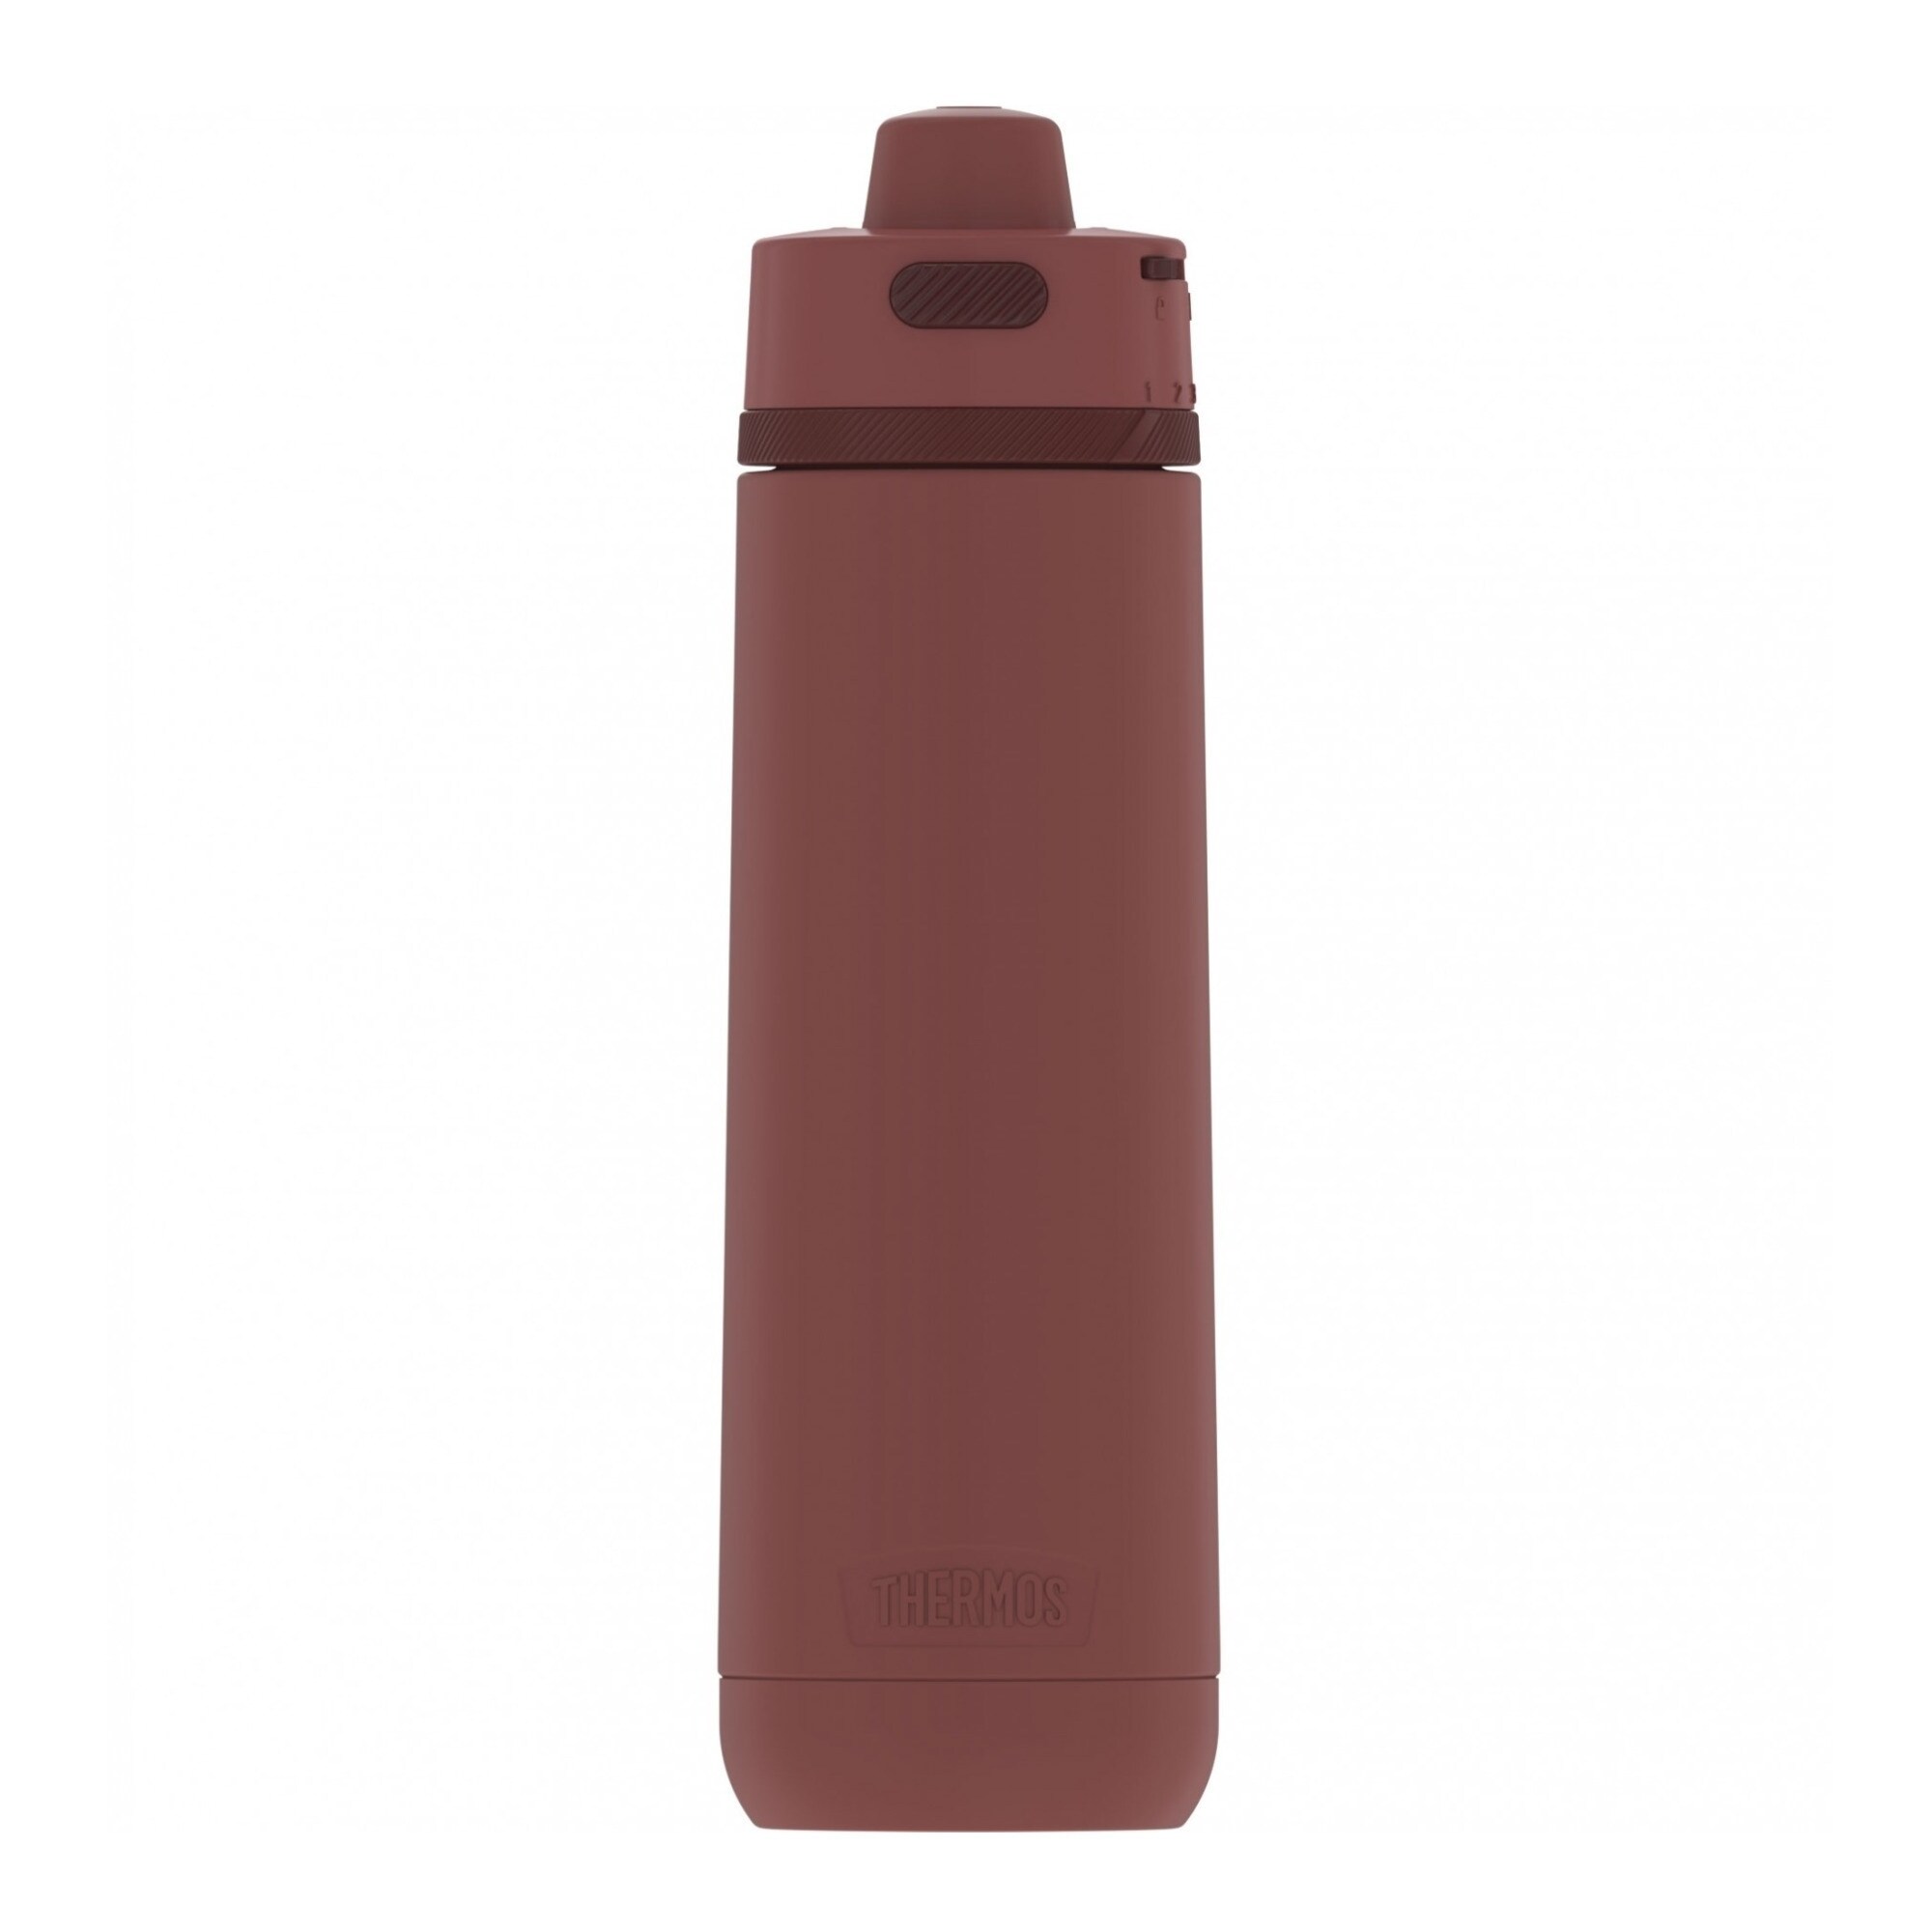 https://ak1.ostkcdn.com/images/products/is/images/direct/f404ba71bd81e192dd181cd04986d5954b678d36/Thermos-Guardian-24oz-Stainless-Steel-Hydration-Bottle-%28Matte-Red%29.jpg